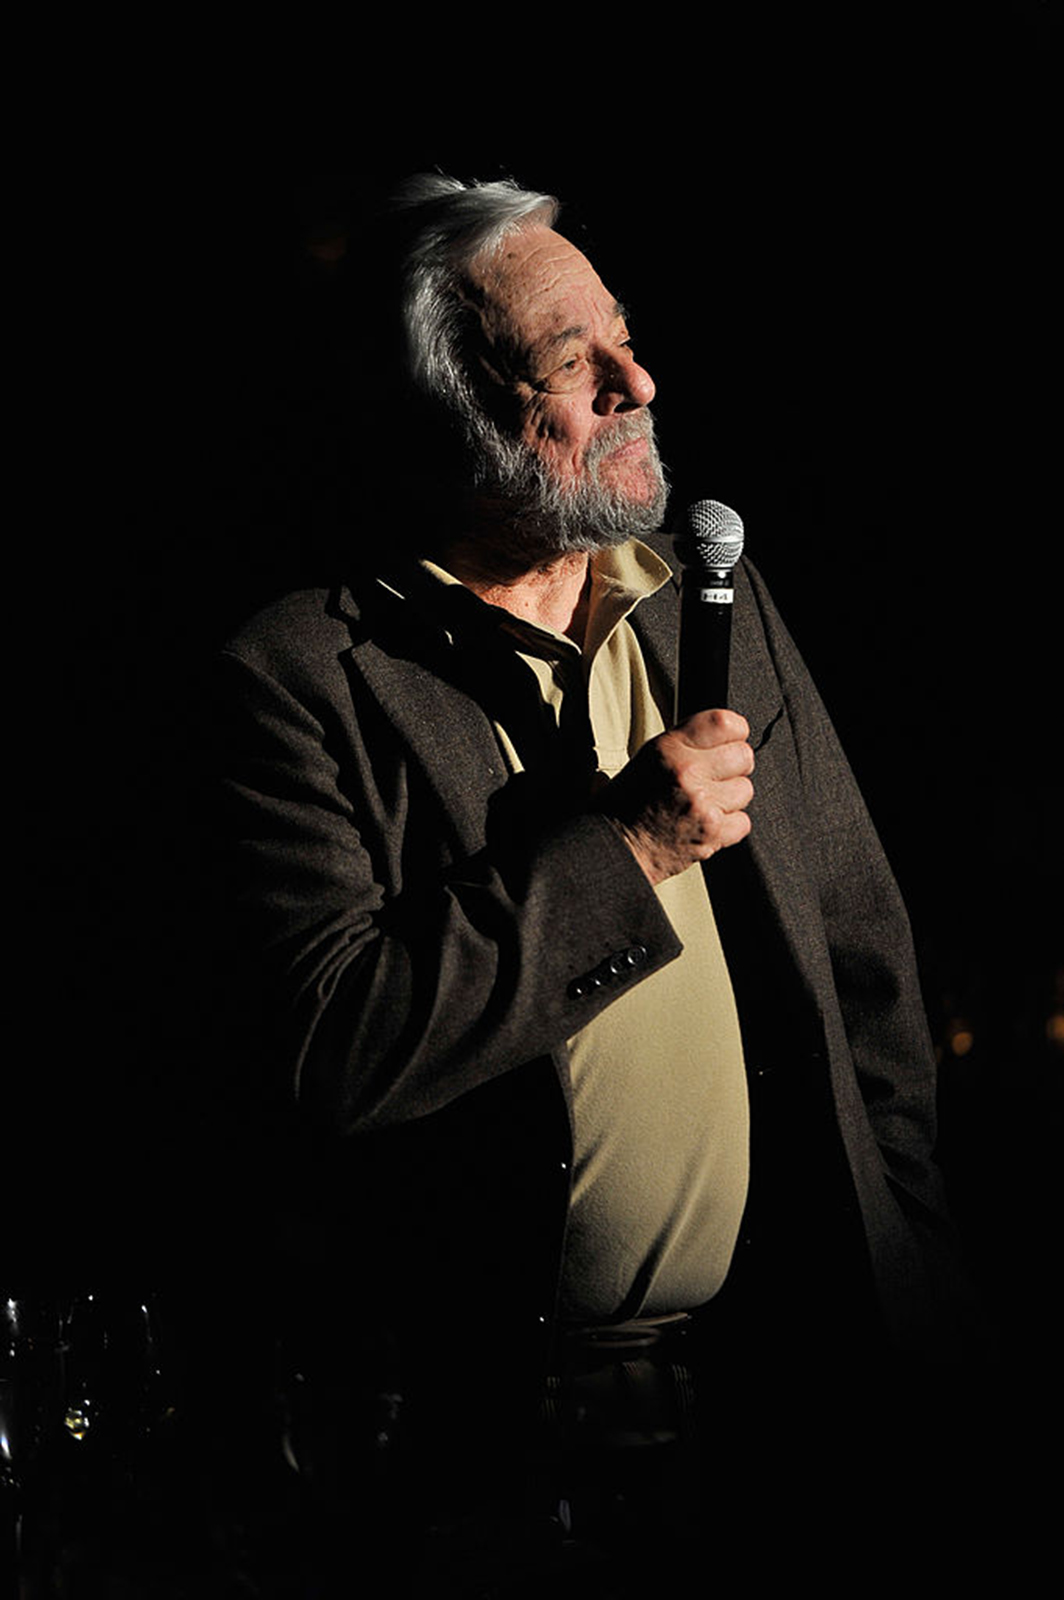 Composer Stephen Sondheim speaks with a microphone in his right hand. A spotlight shines on him, casting a sharp shadow contrast of the front of his body and his face with the black background.